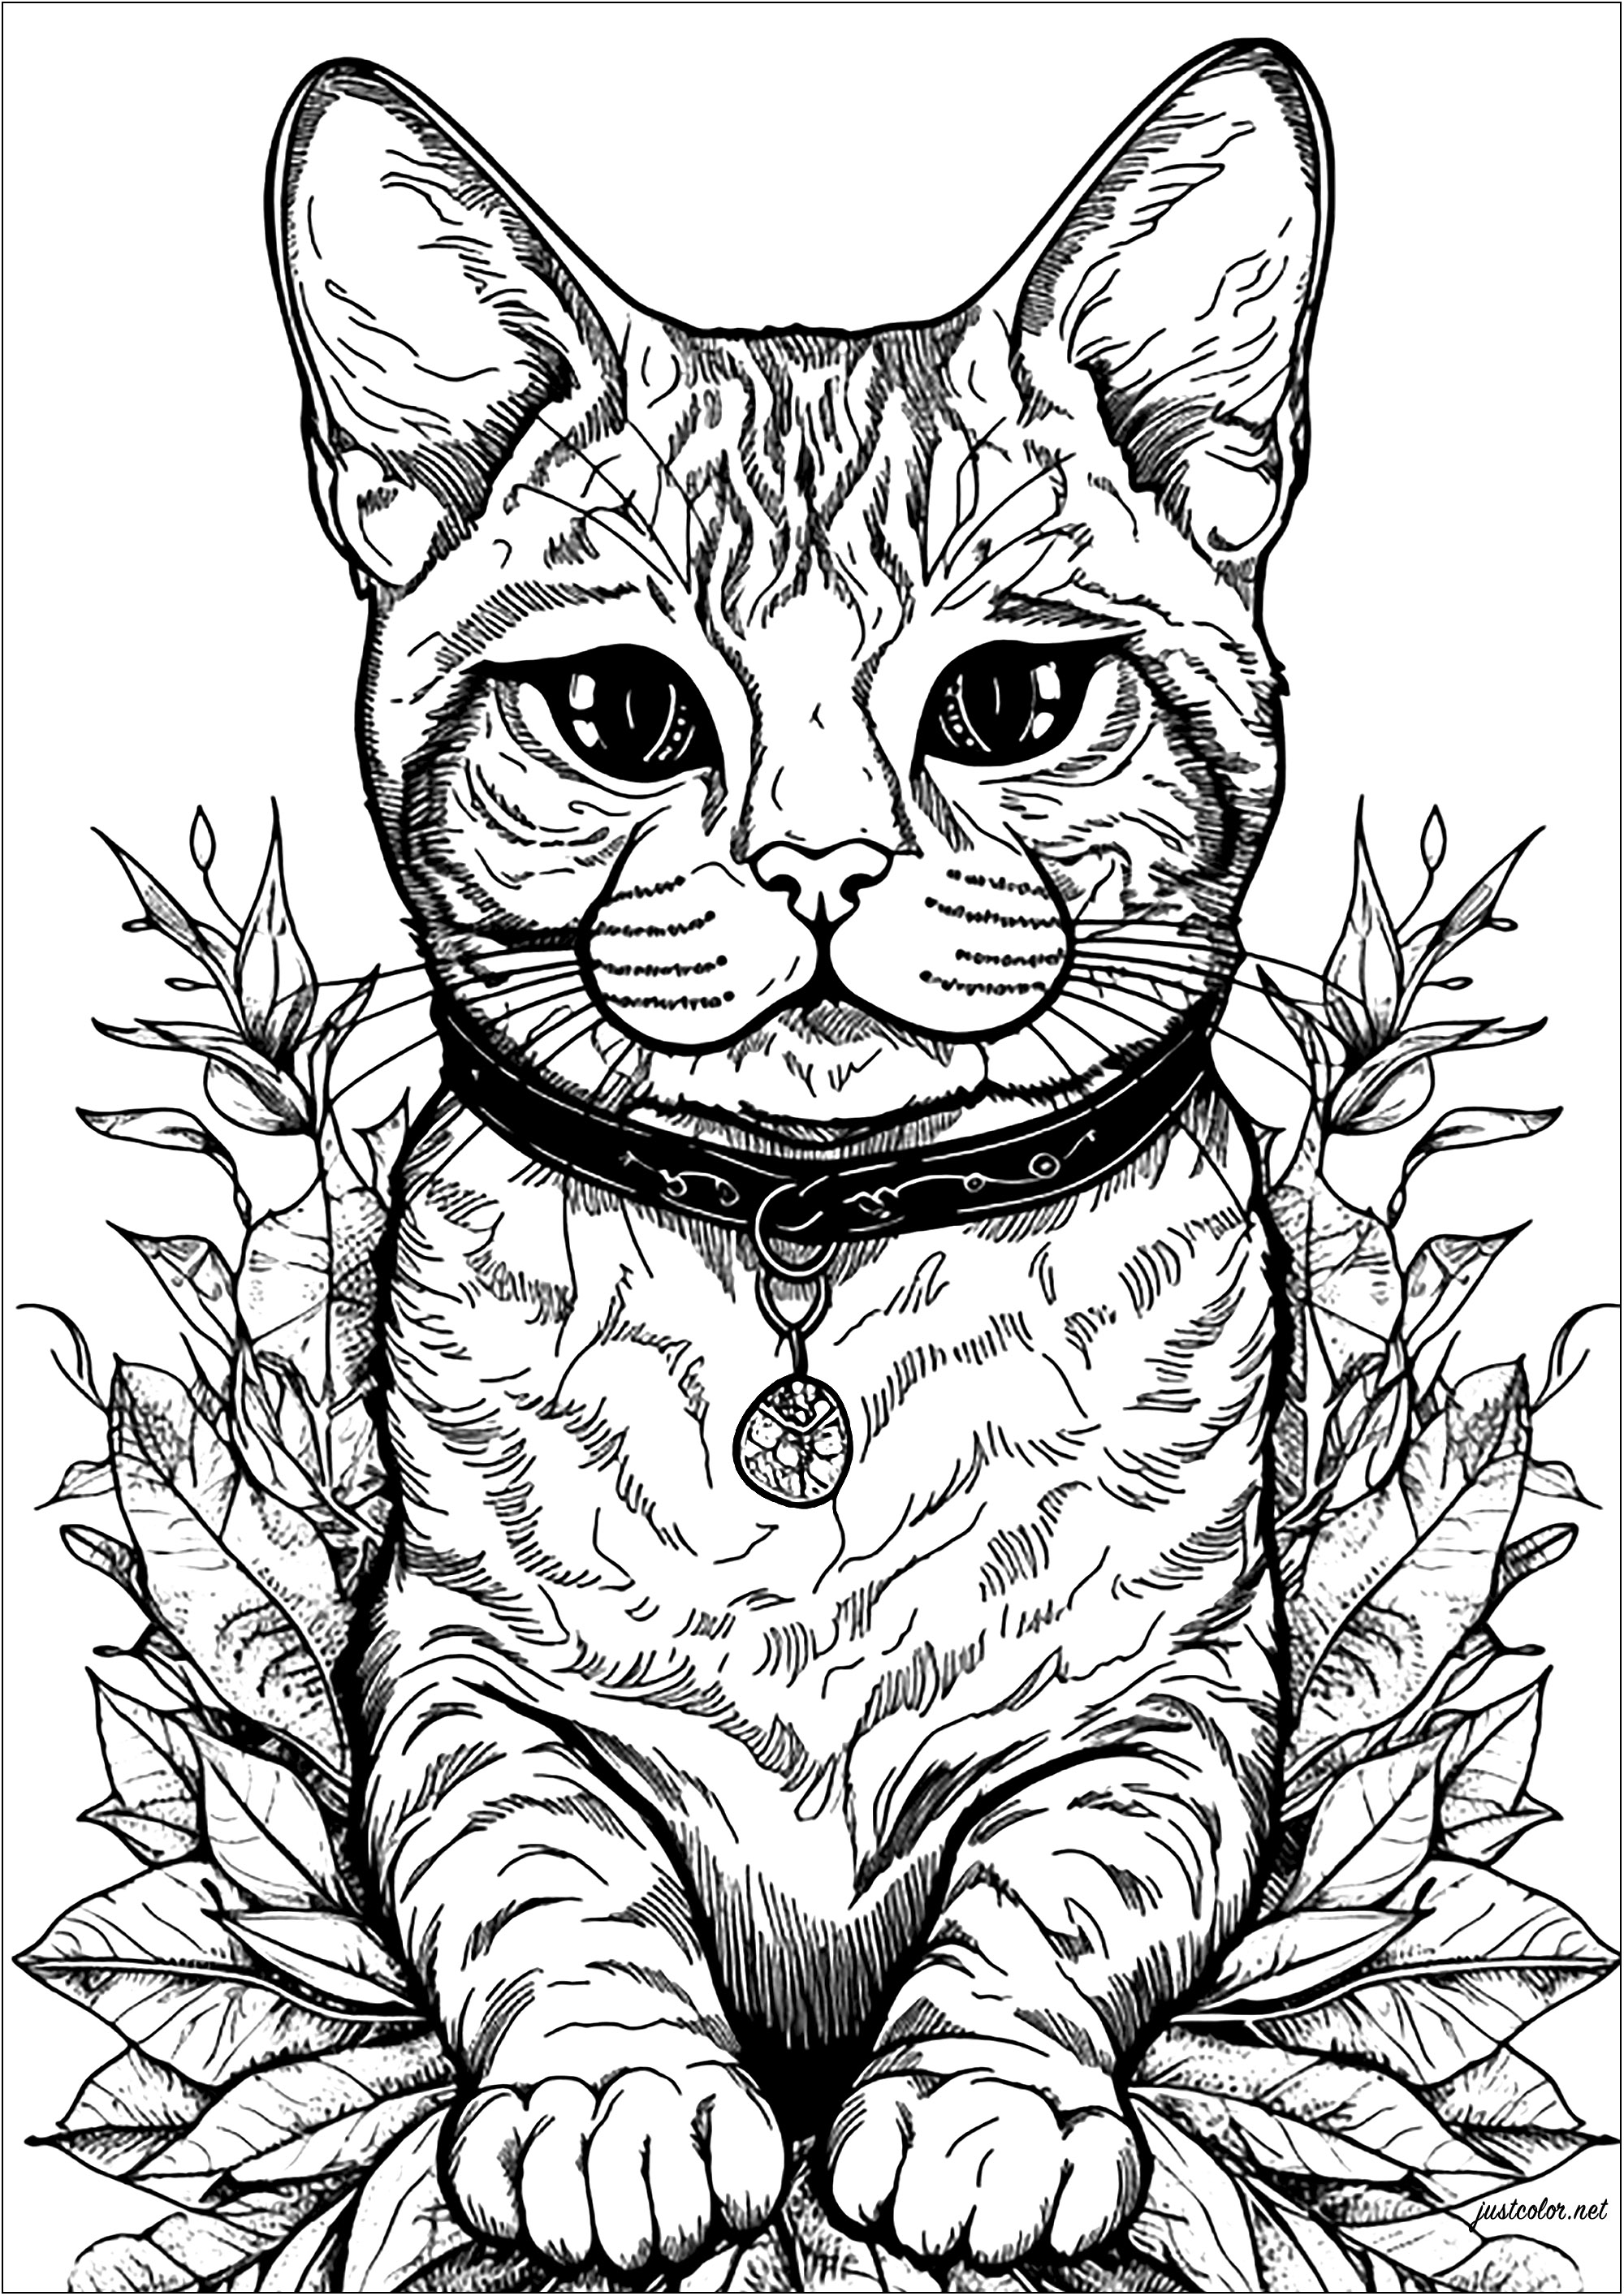 Gato bonito e folhas - Gatos - Coloring Pages for Adults